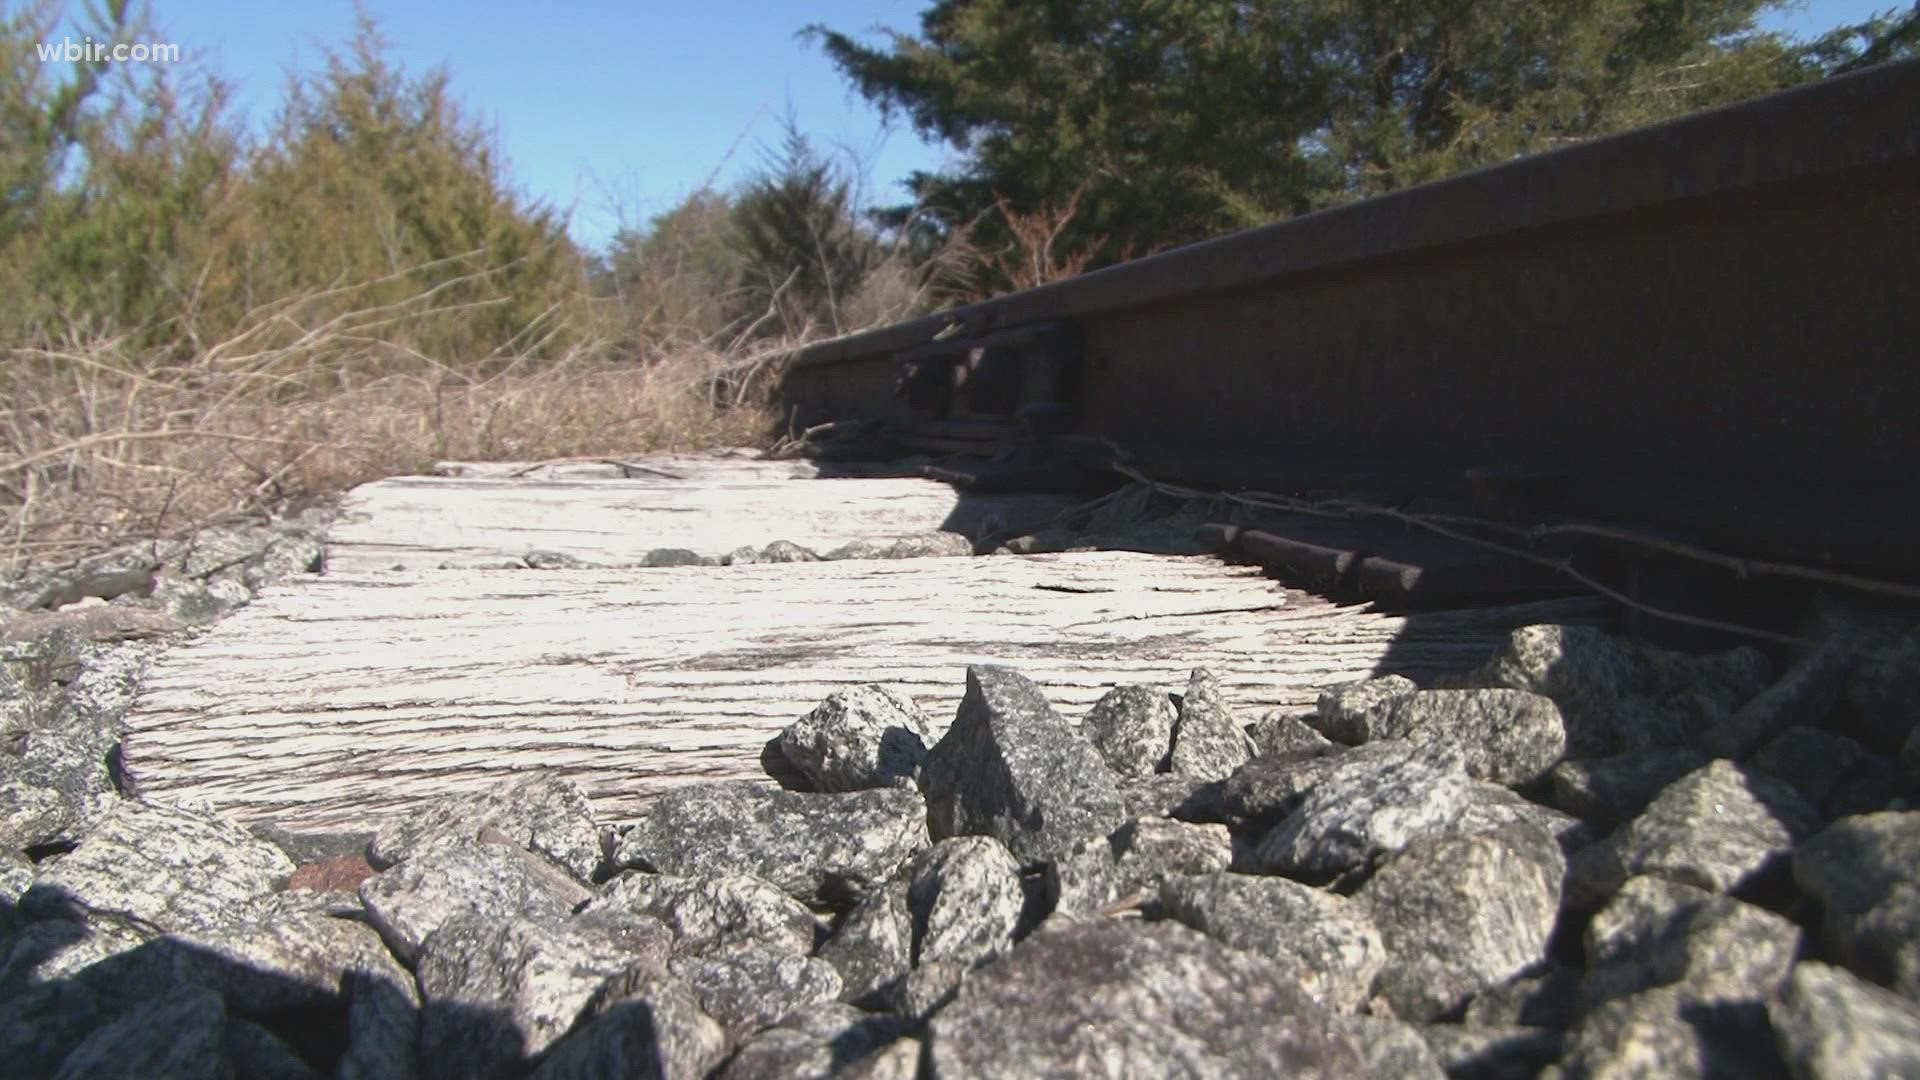 The City of Oak Ridge is working to convert more than 4 and a half miles of unused railroad into greenways.